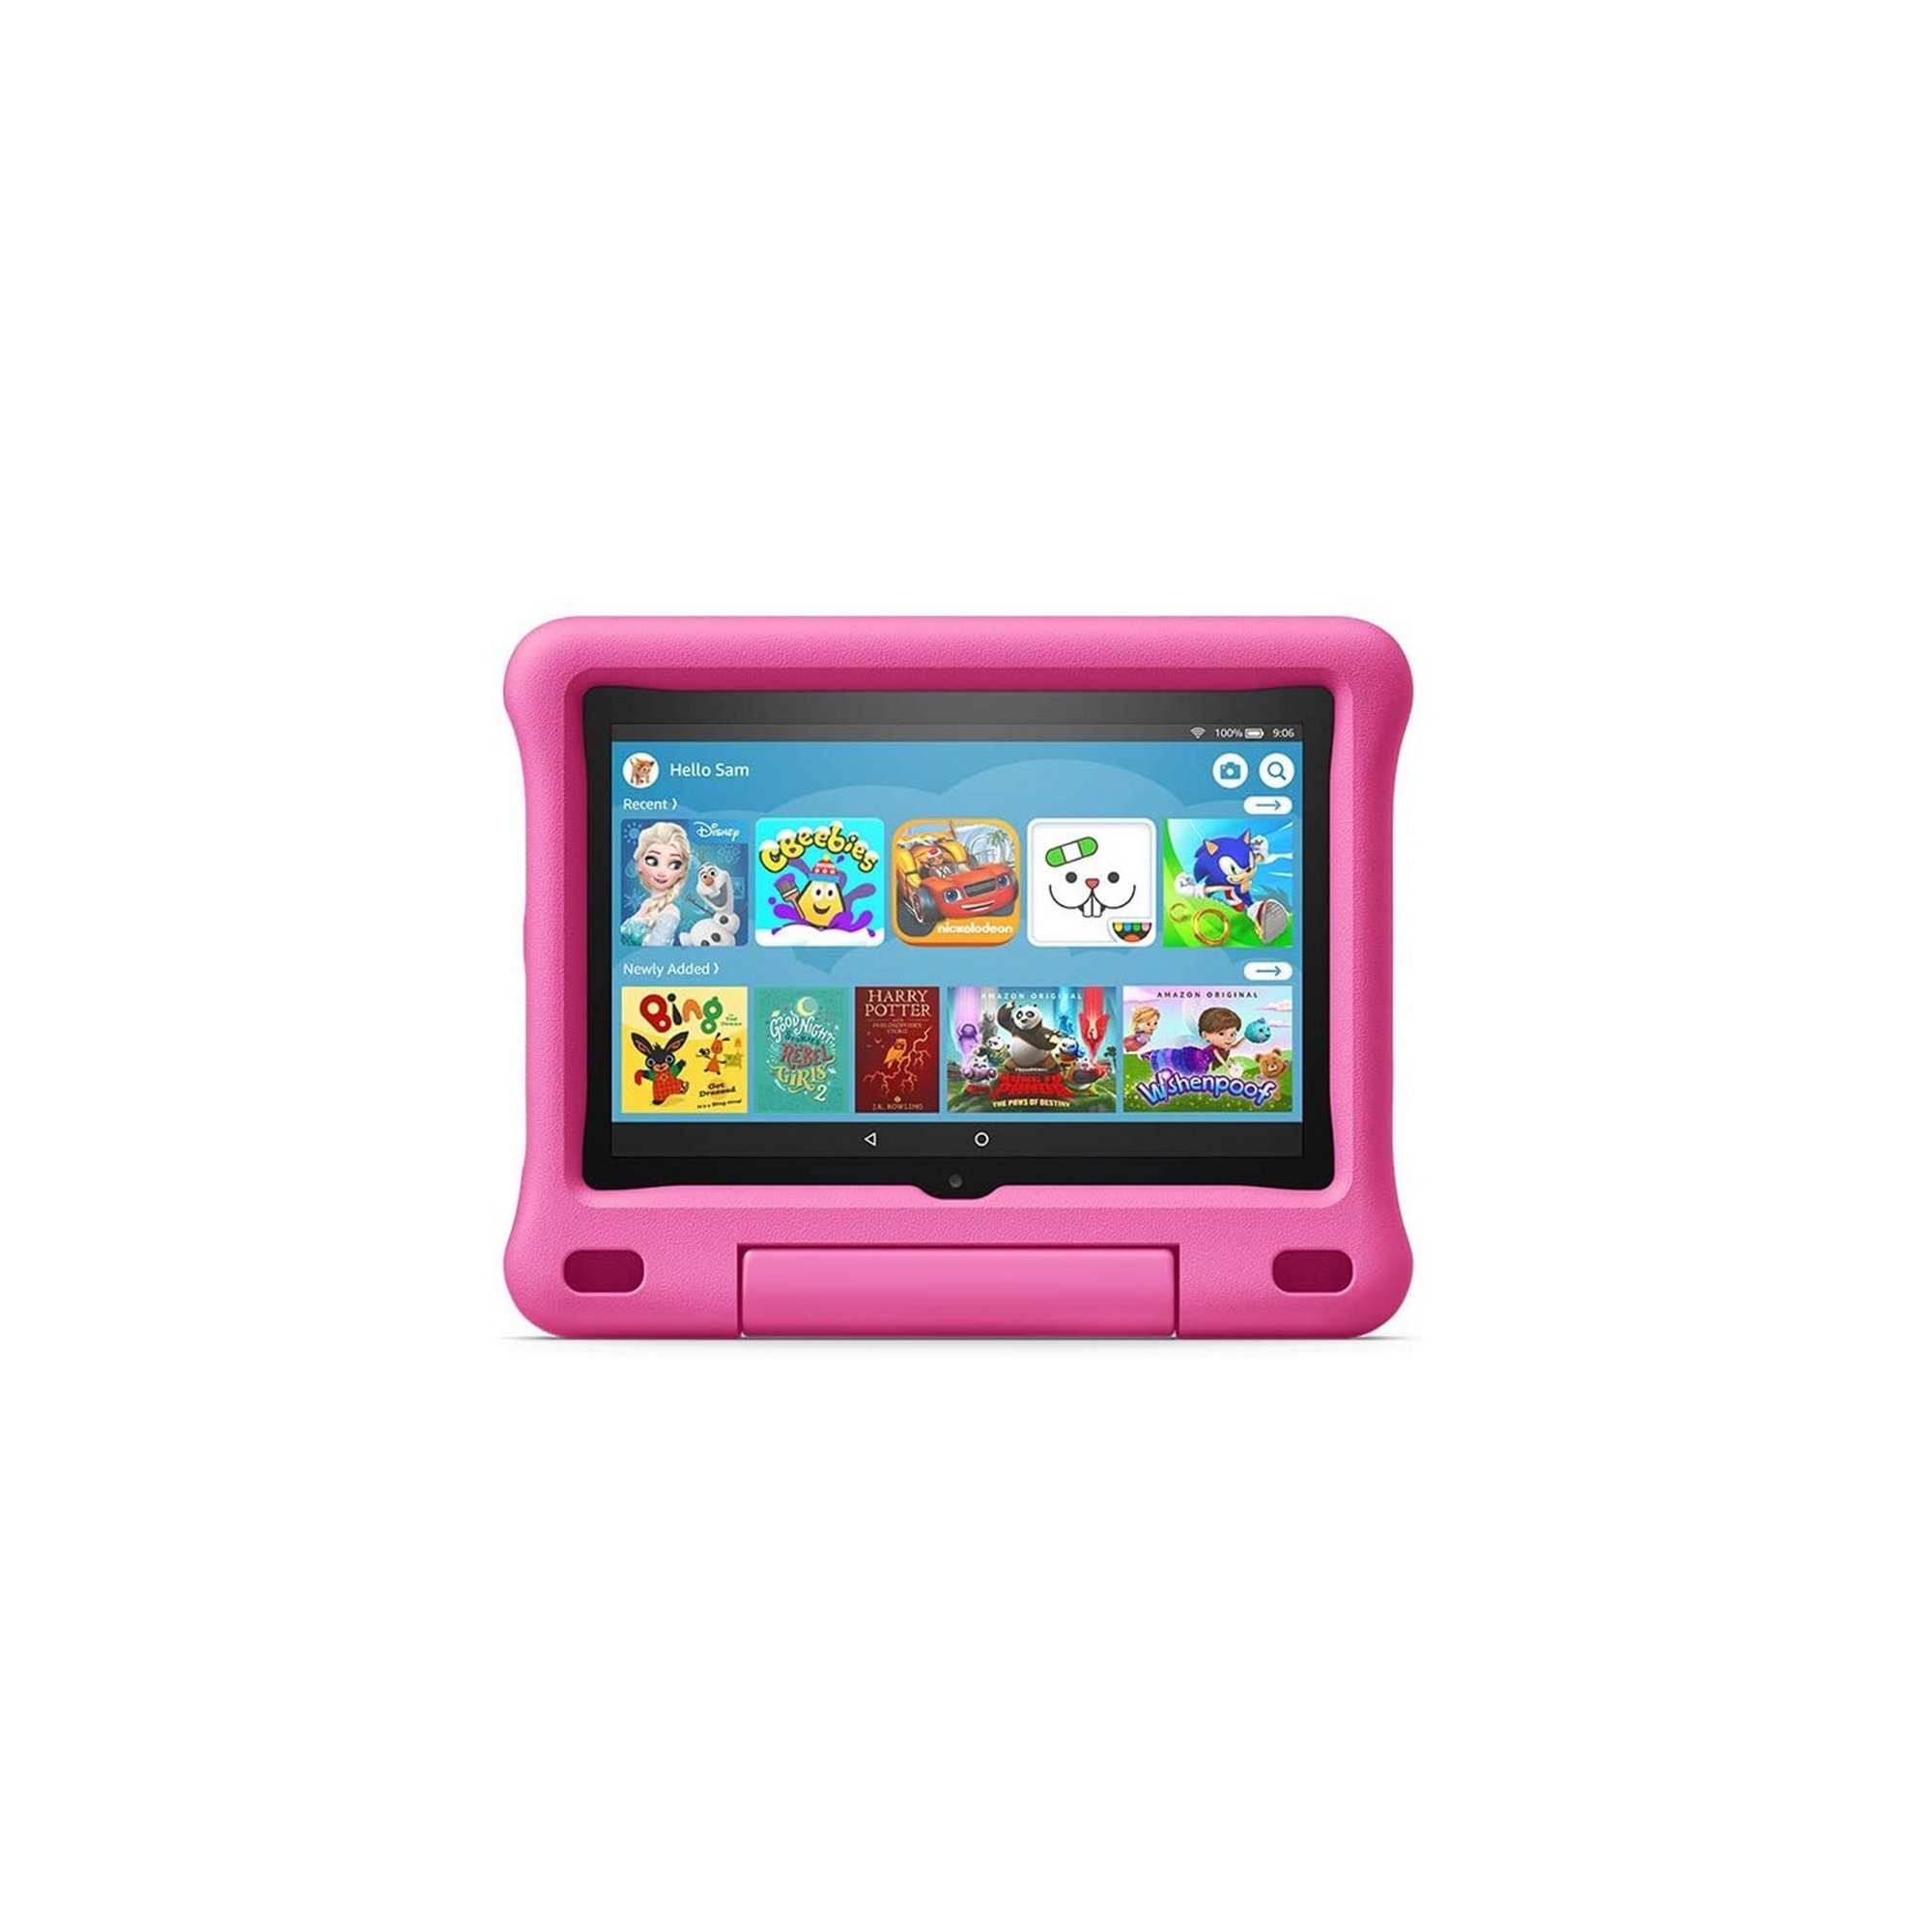 Amazon Fire HD 8 Inch Kids Edition Tablet and Case